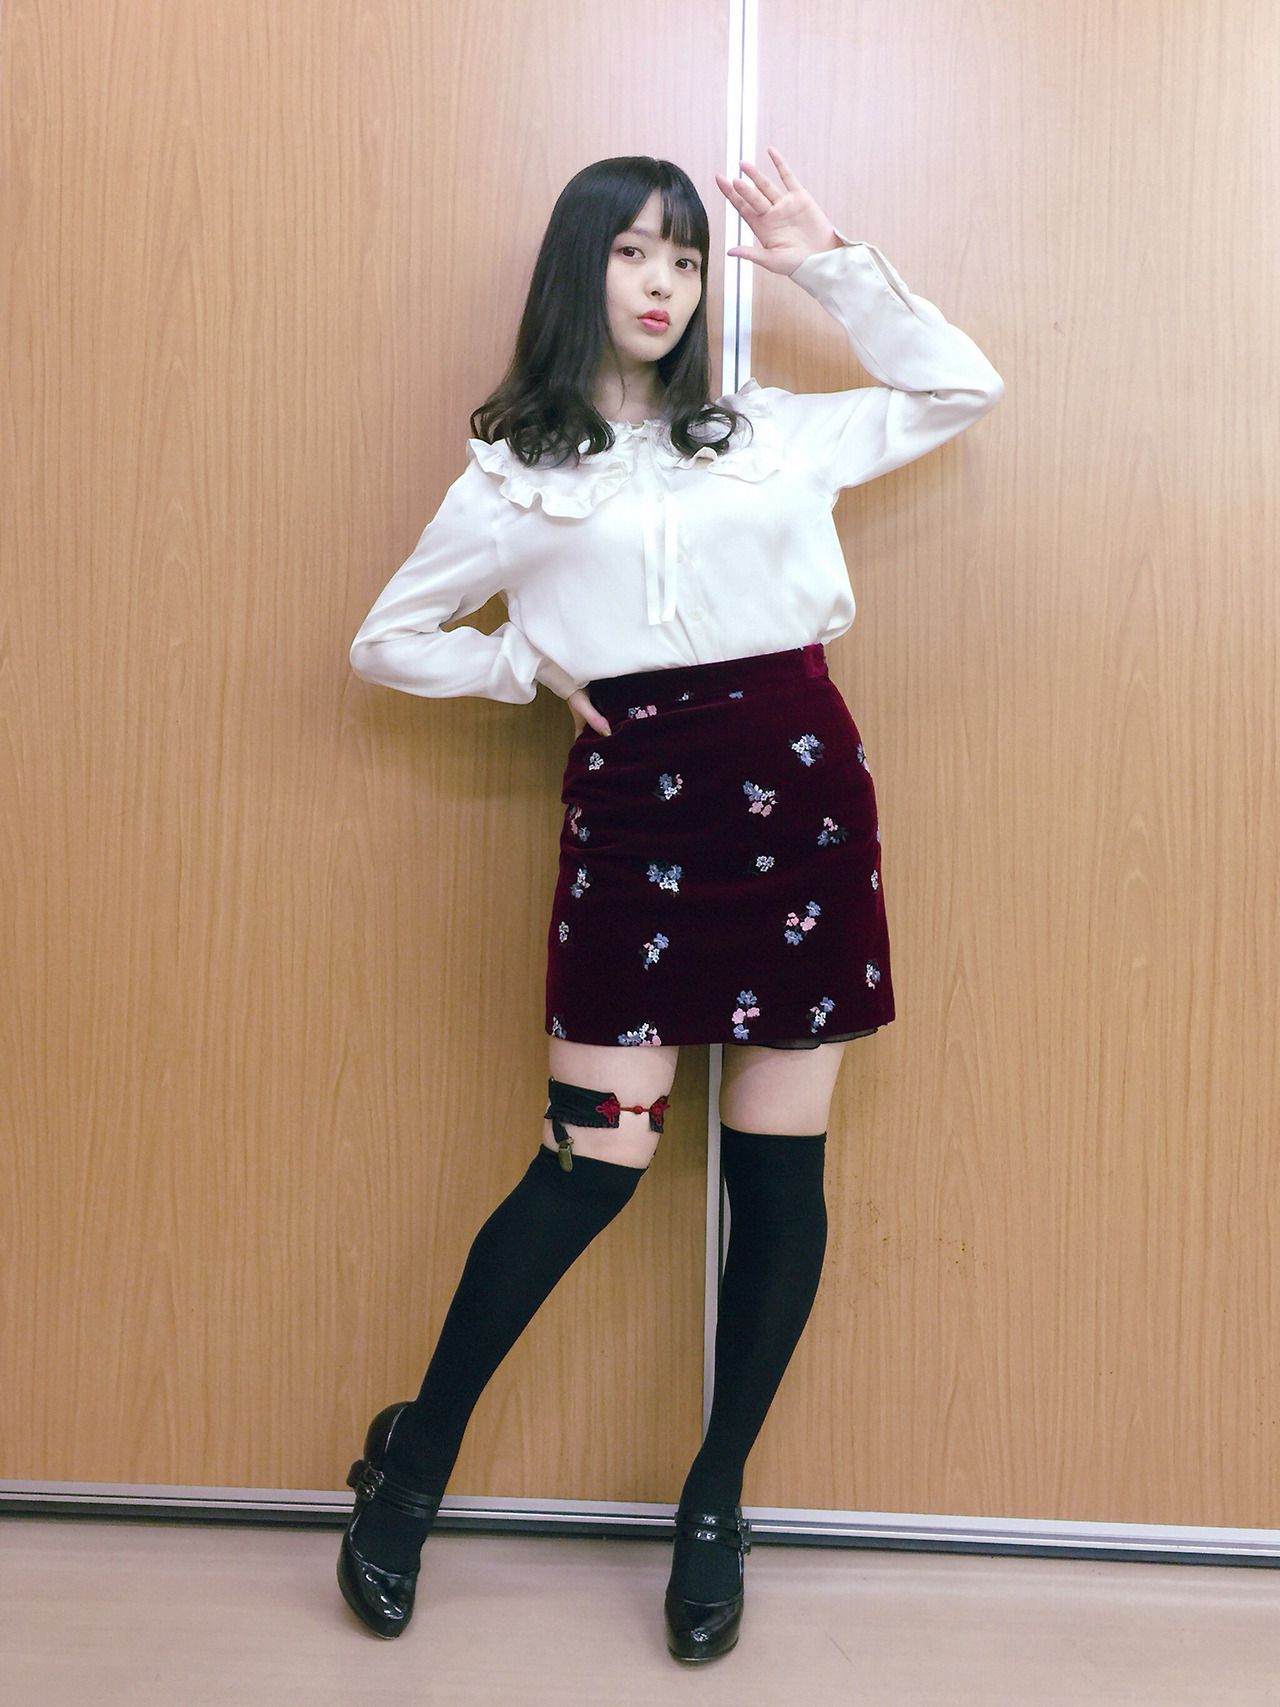 Sumire Uesaka "to emphasize the thigh... W] also erotic image offer Wwwwwww 17